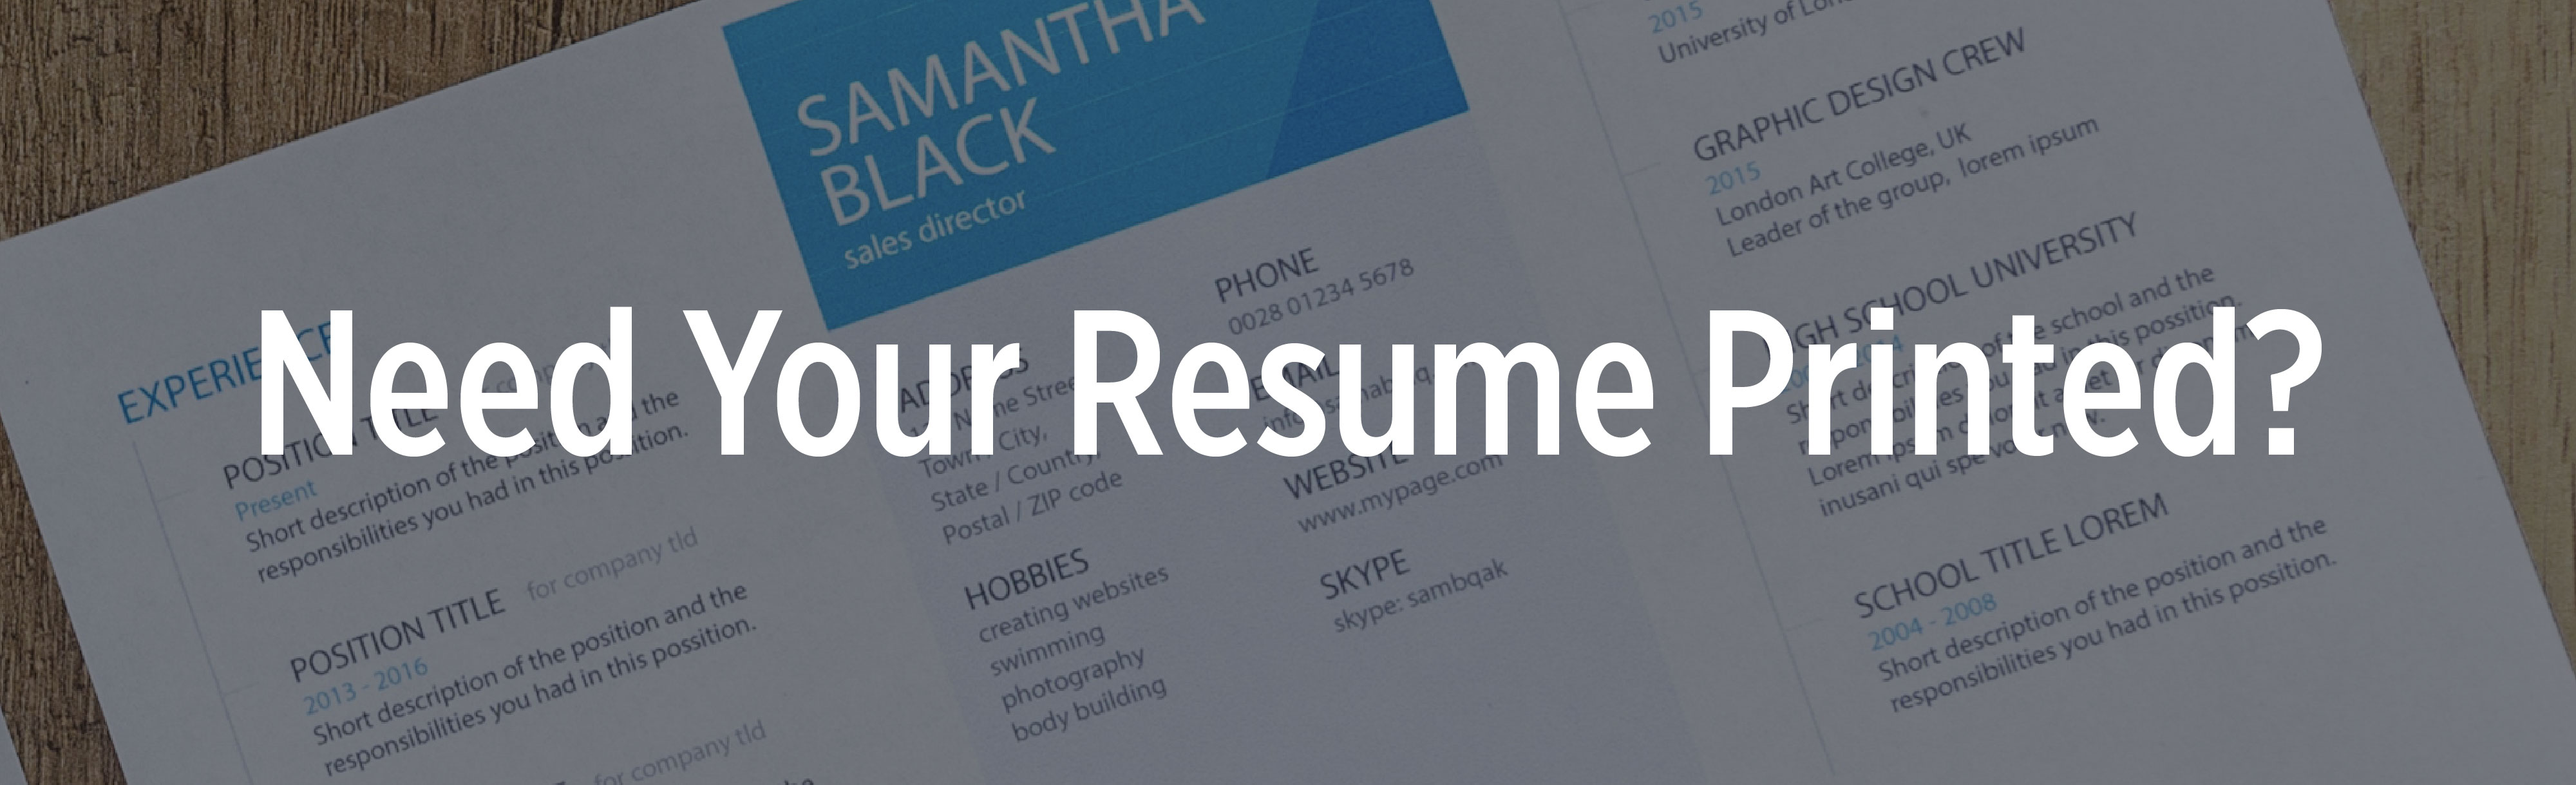 graphic of Need Your Resume Printed?